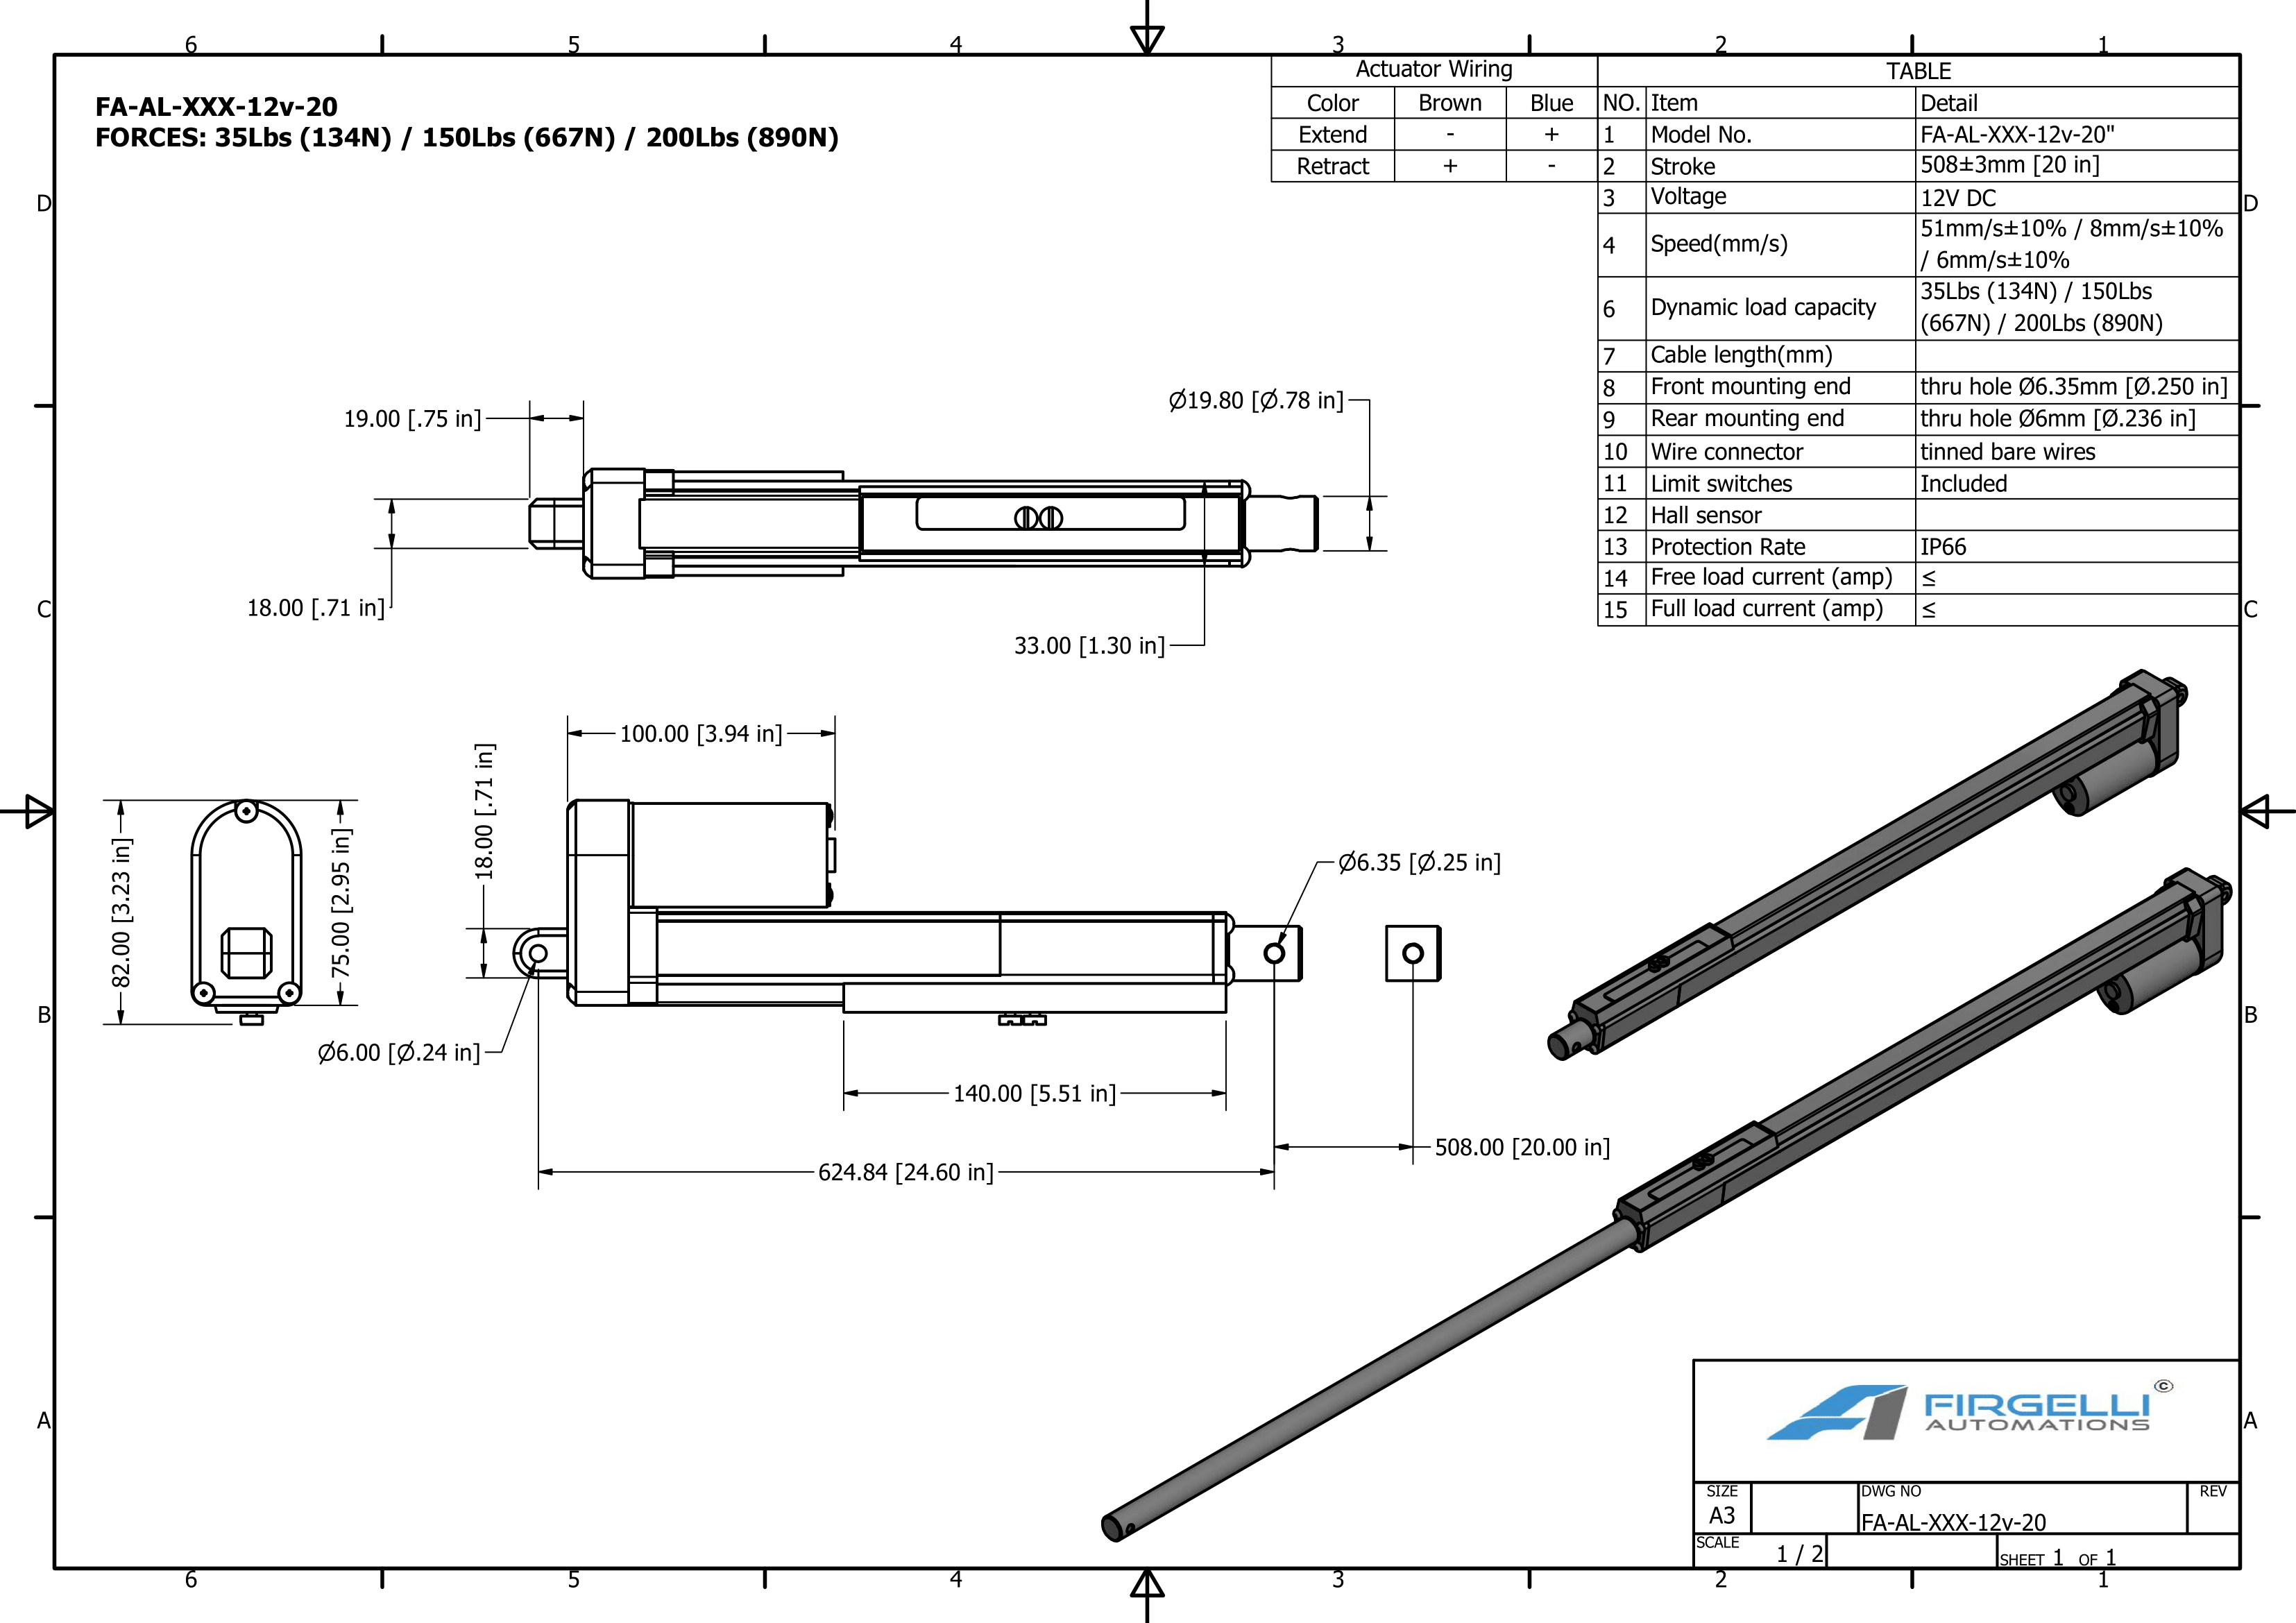 Adjustable stroke actuator dimensions with a 24 inch stroke